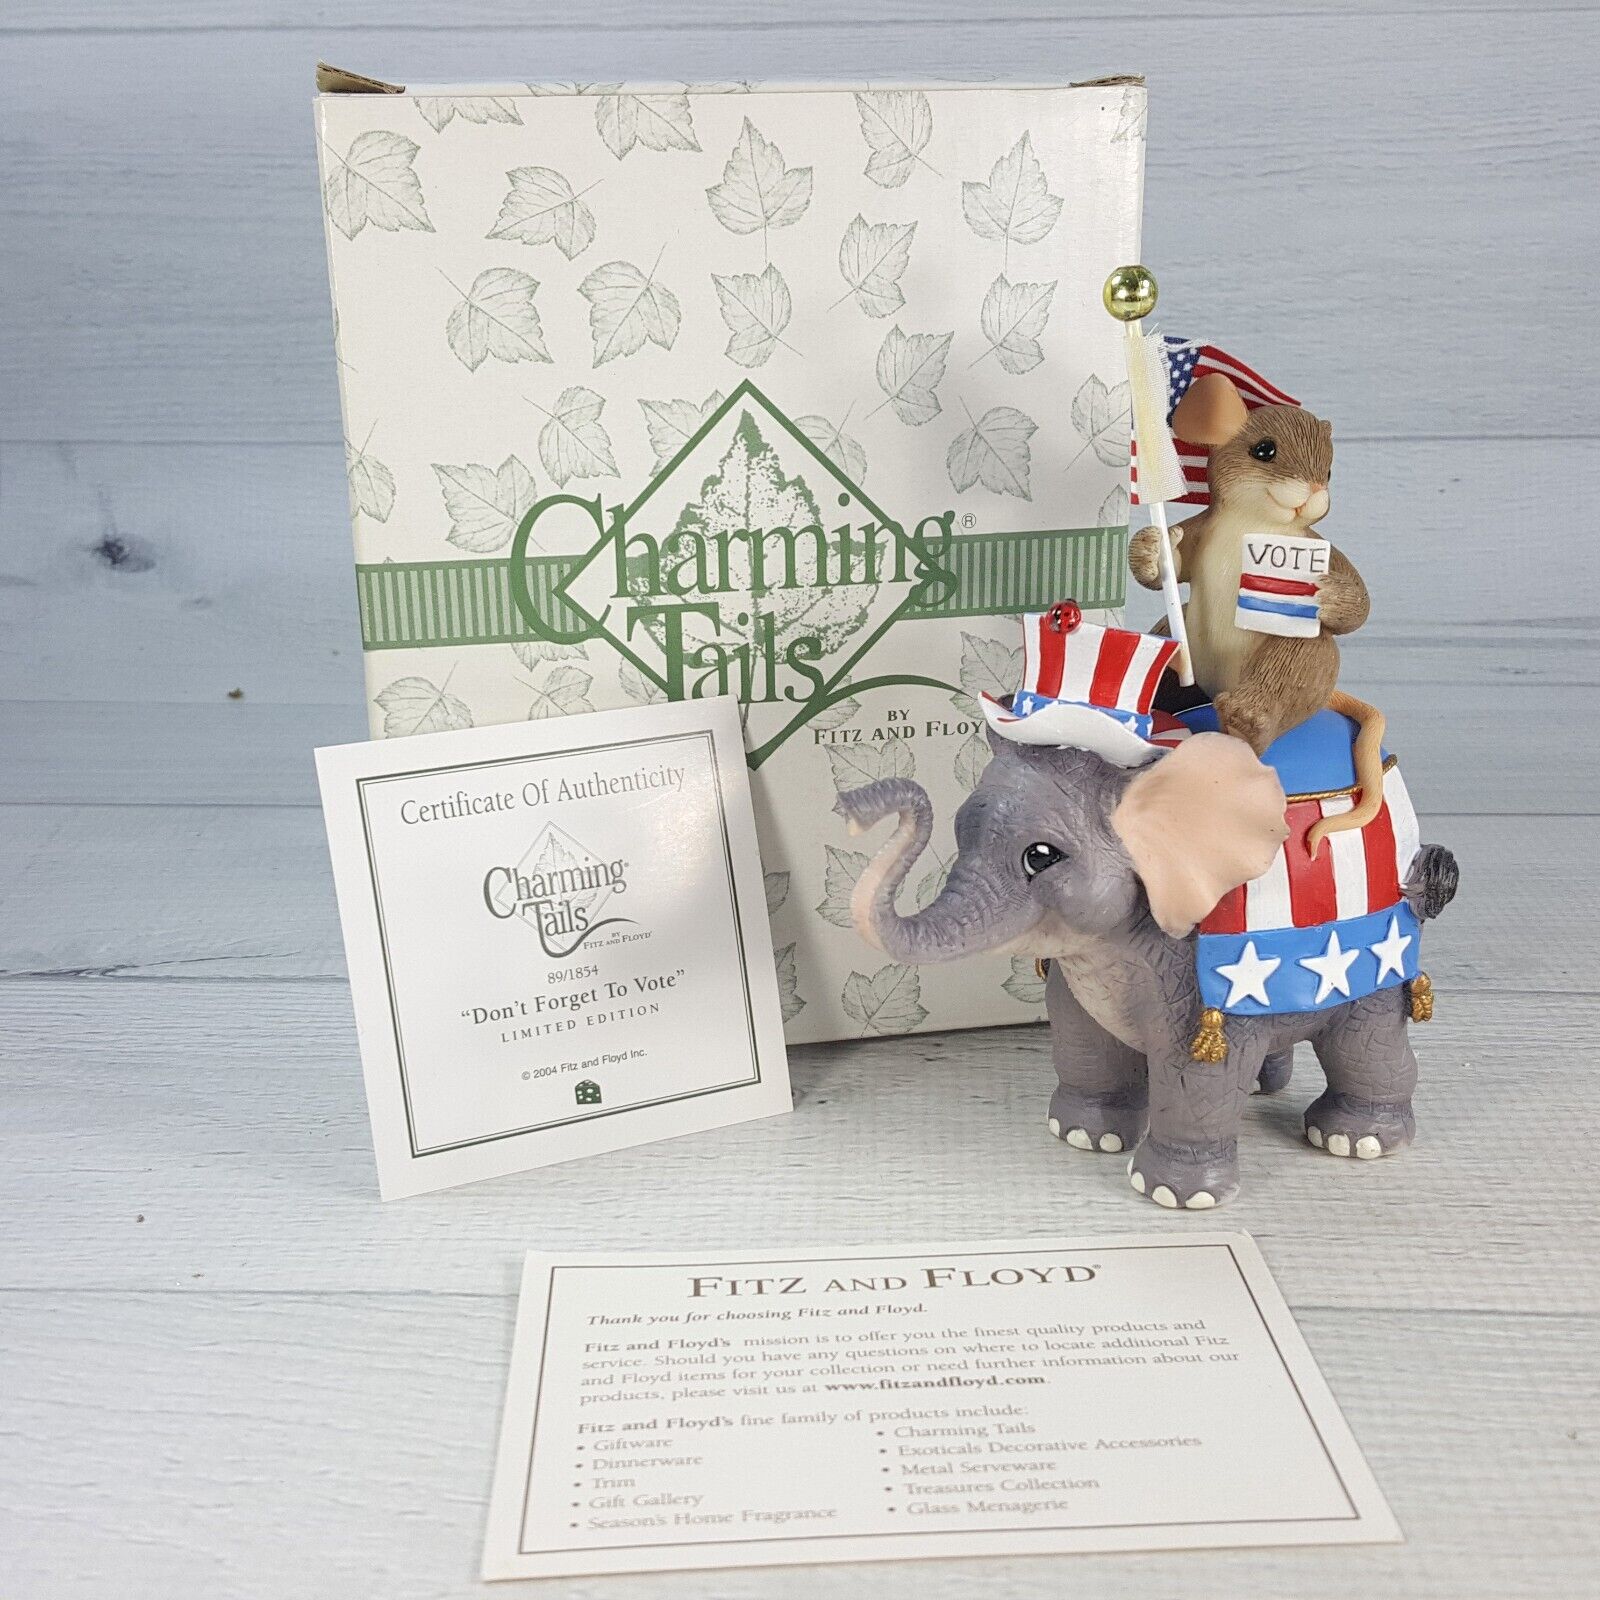 Fitz & Floyd Charming Tails Don't Forget to Vote Elephant Mouse Figurine 89/1854